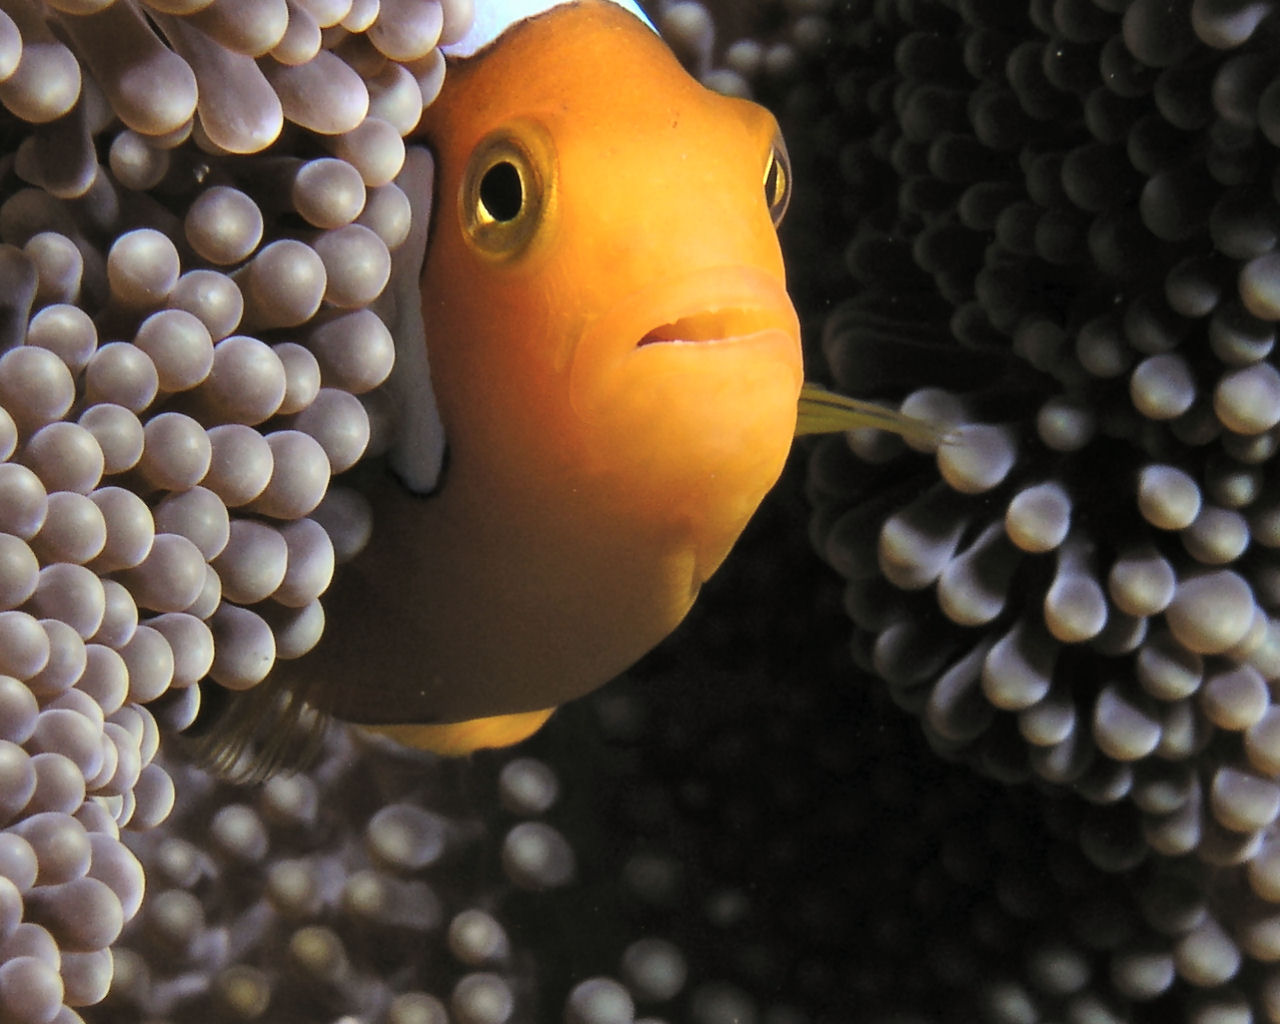 Anemone fish at every site